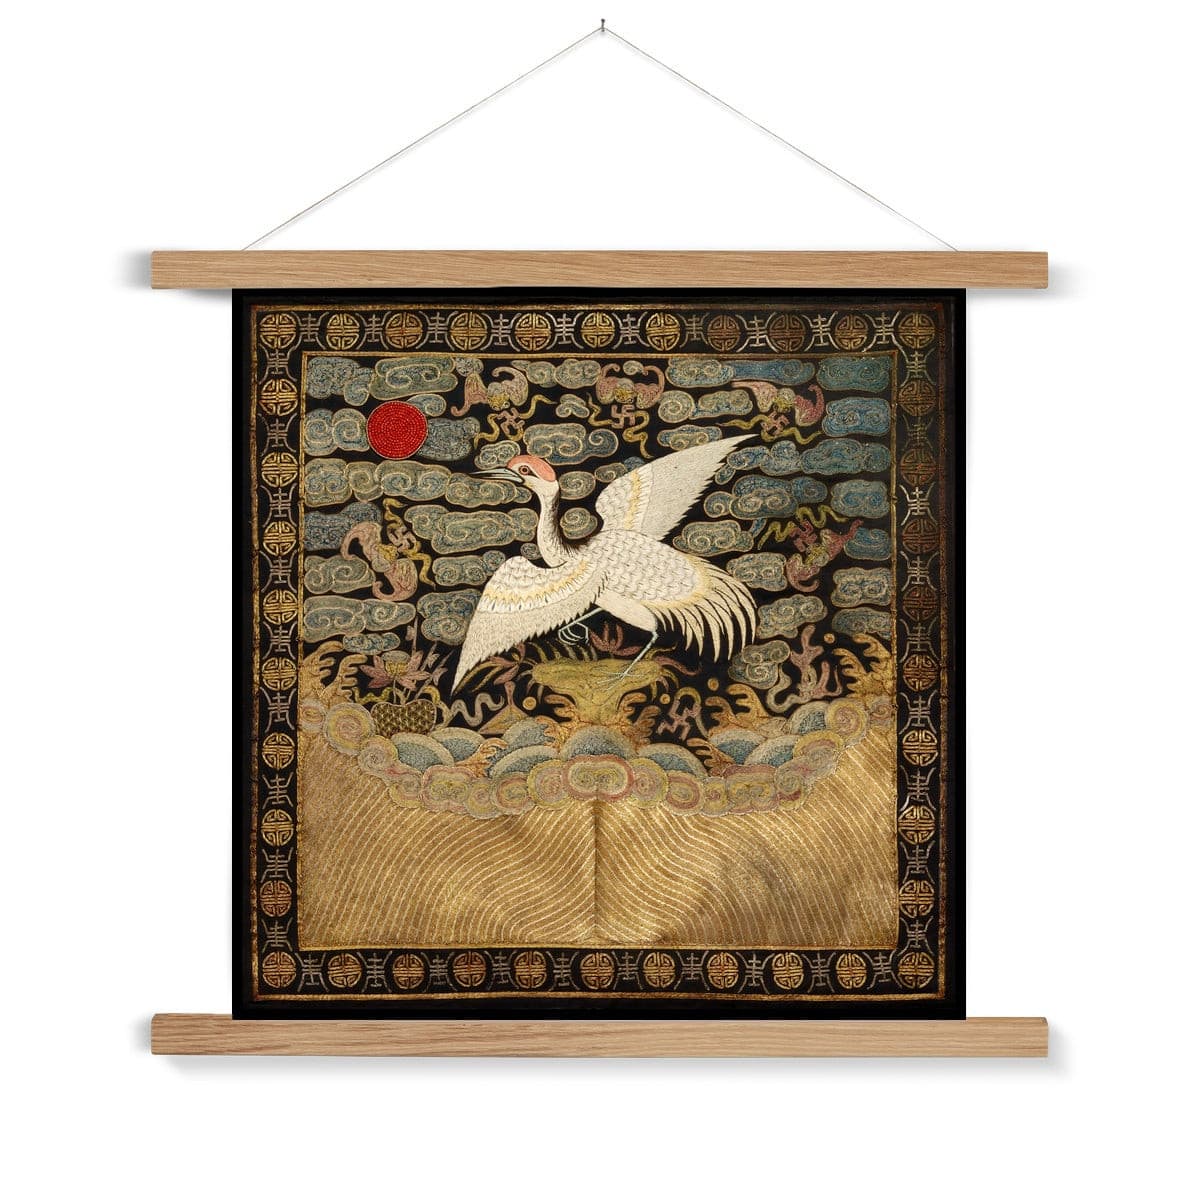 Fine art 12"x12" / Natural Frame Qing Dynasty, Chinese Silk Embroidery Heron Mandarin Square Antique Vintage Fine Art Print with Hanger